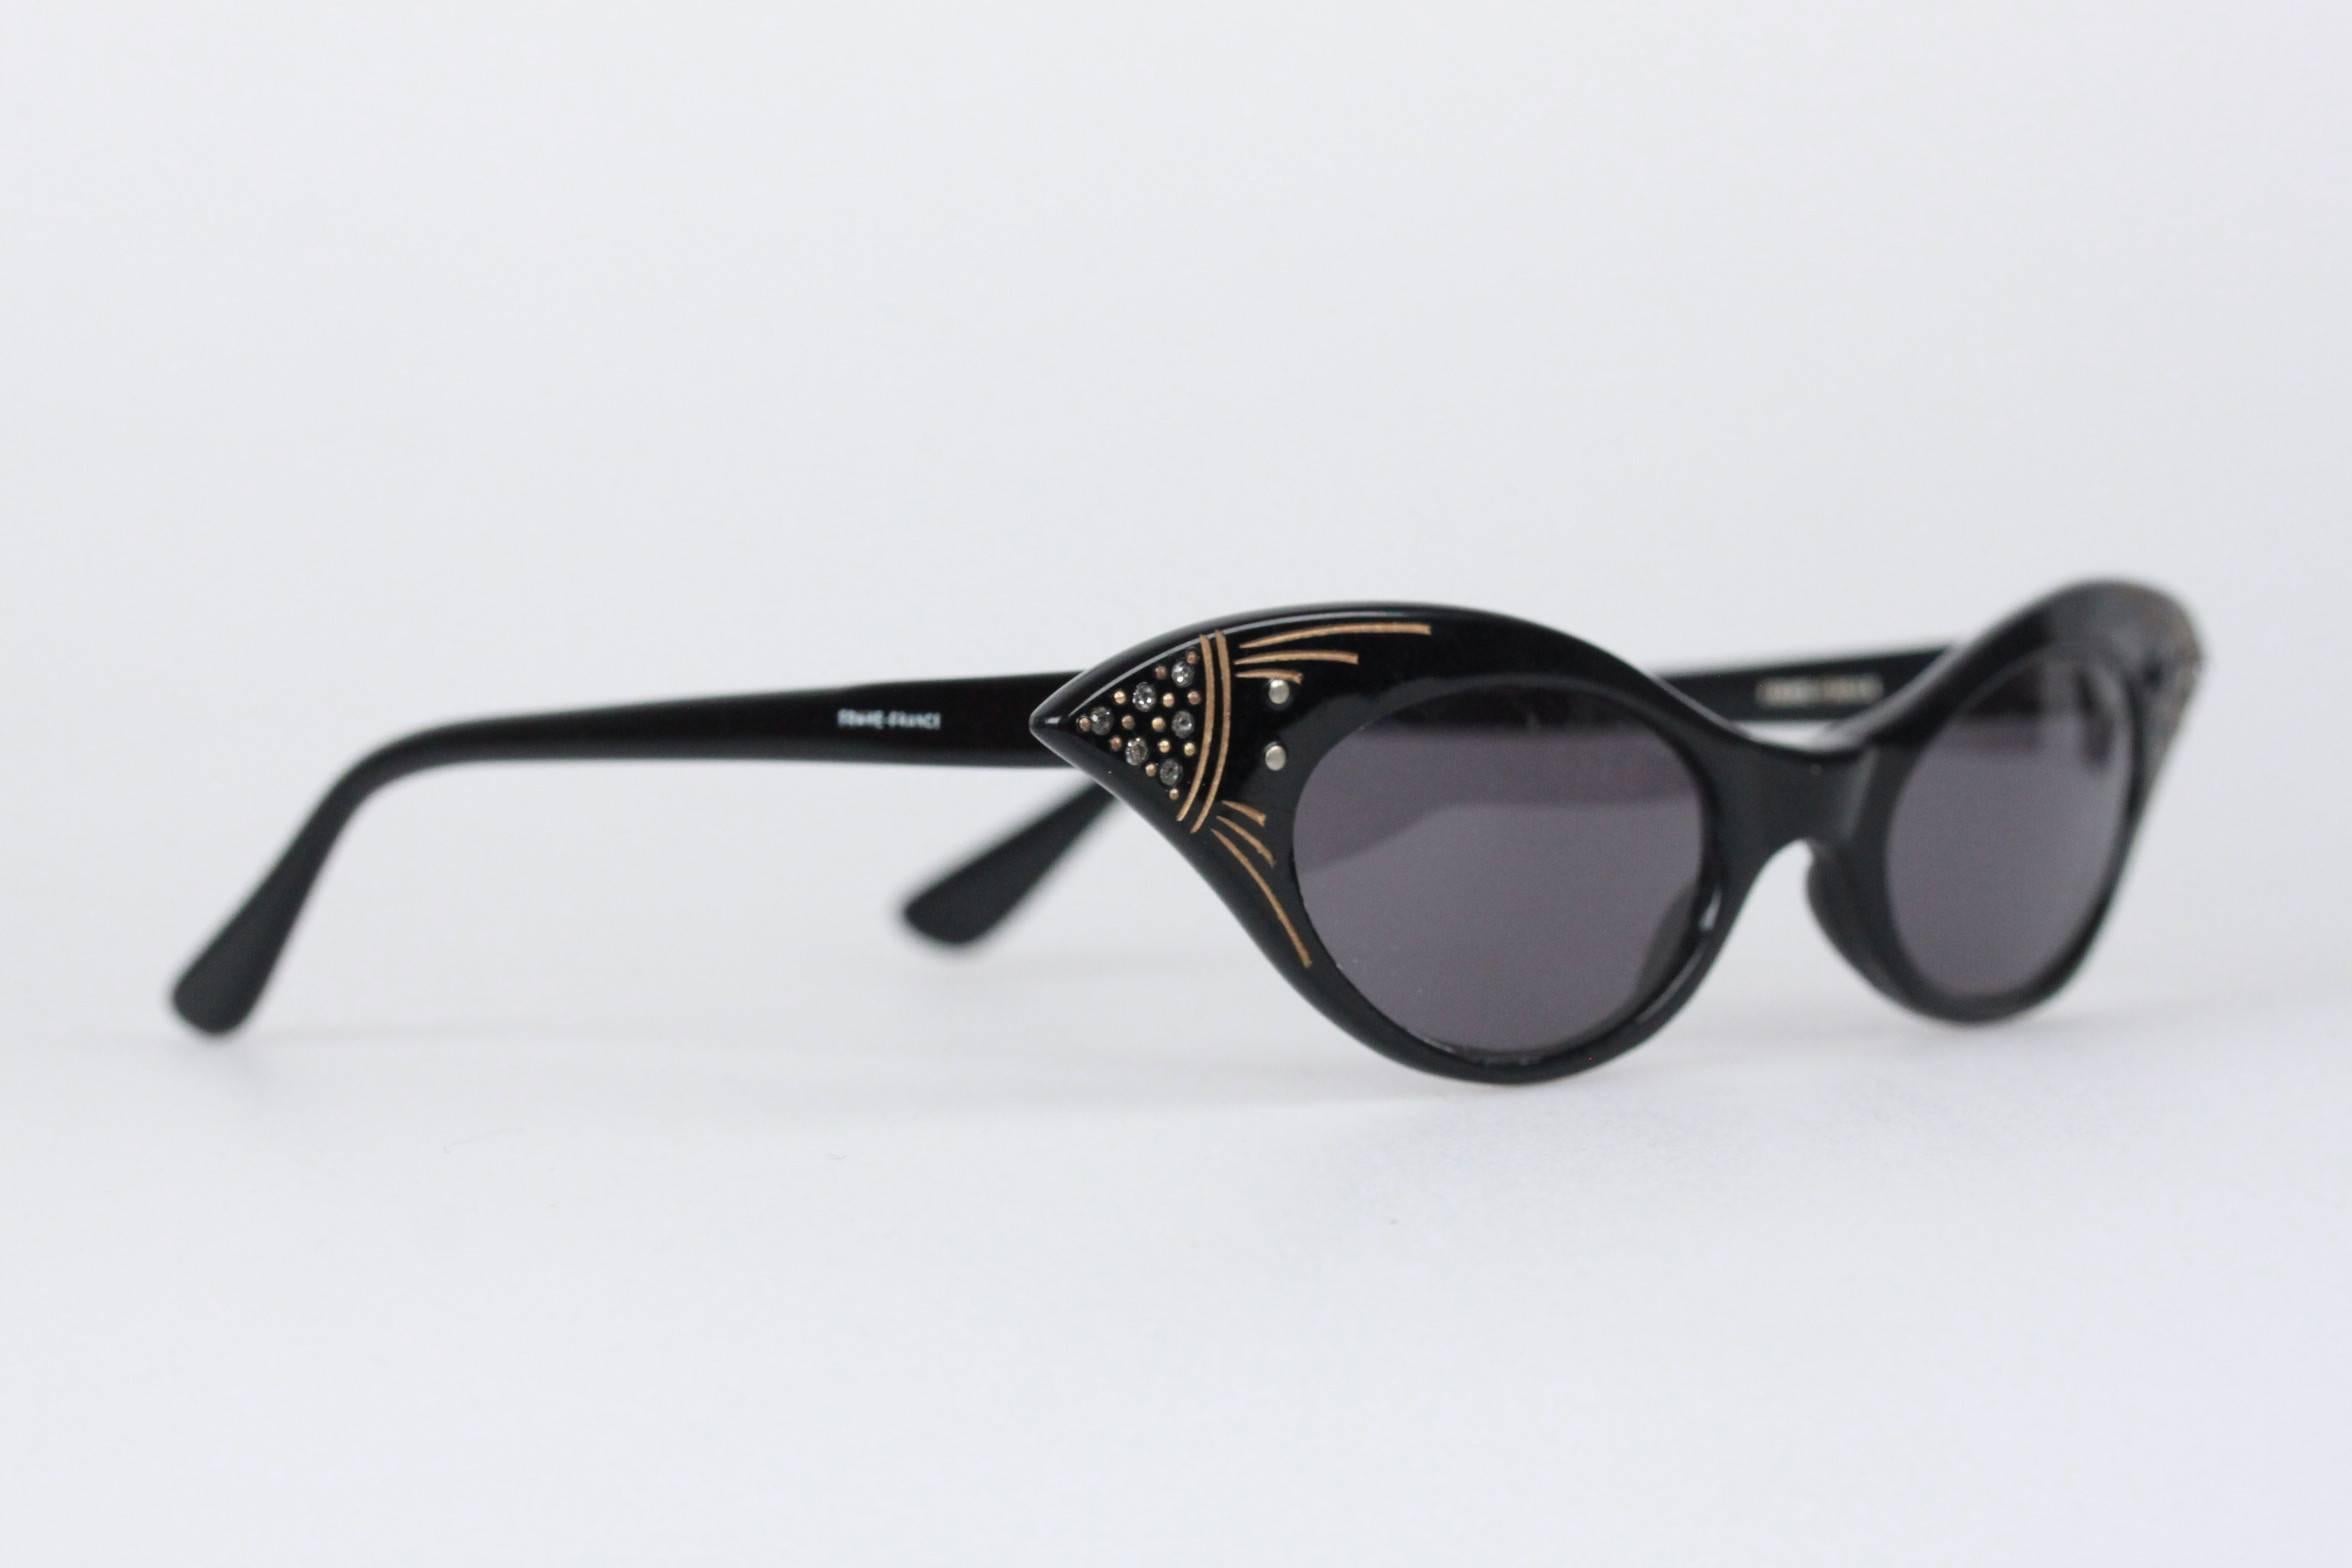 Unique vintage cat-eye sunglasses that are always timeless and always classy. Made with an acetate black based frame  with rhinestones and golden painted indented detailing on corners, metal hinges and replaced UV protected lenses. Made in